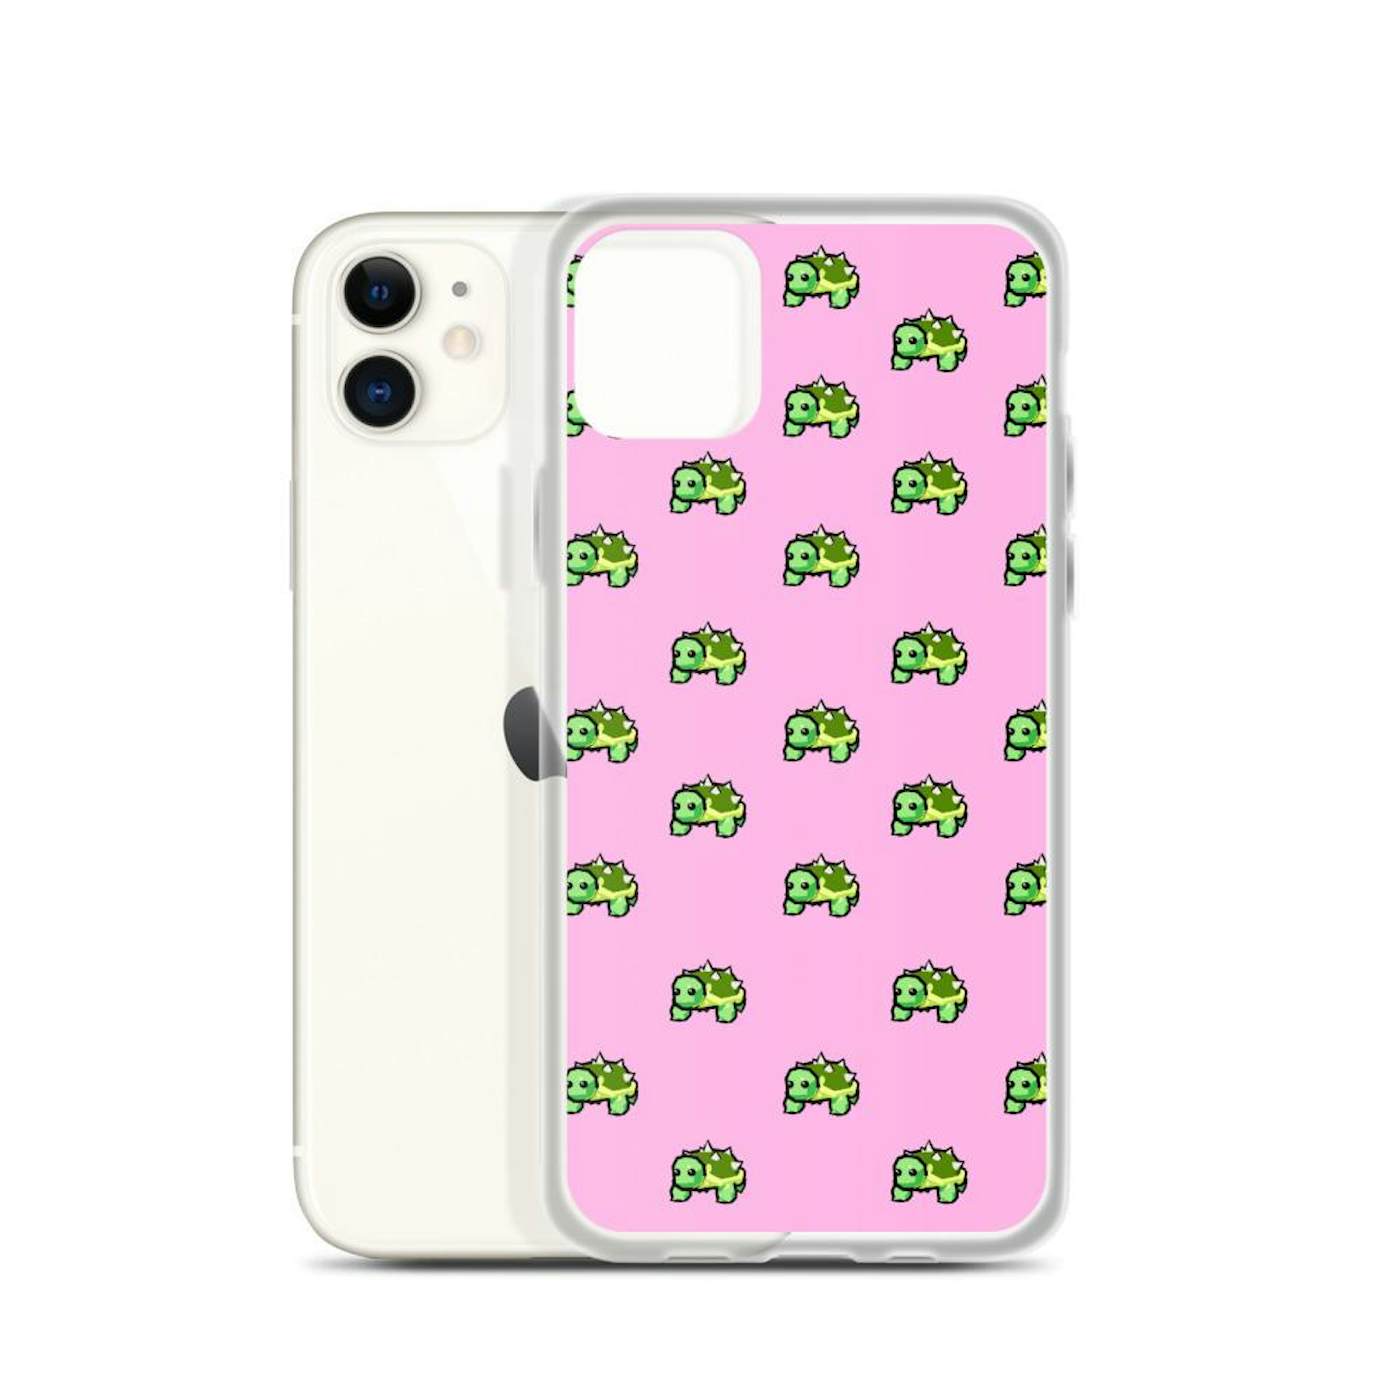 chillpill TURTLES iPhone Case